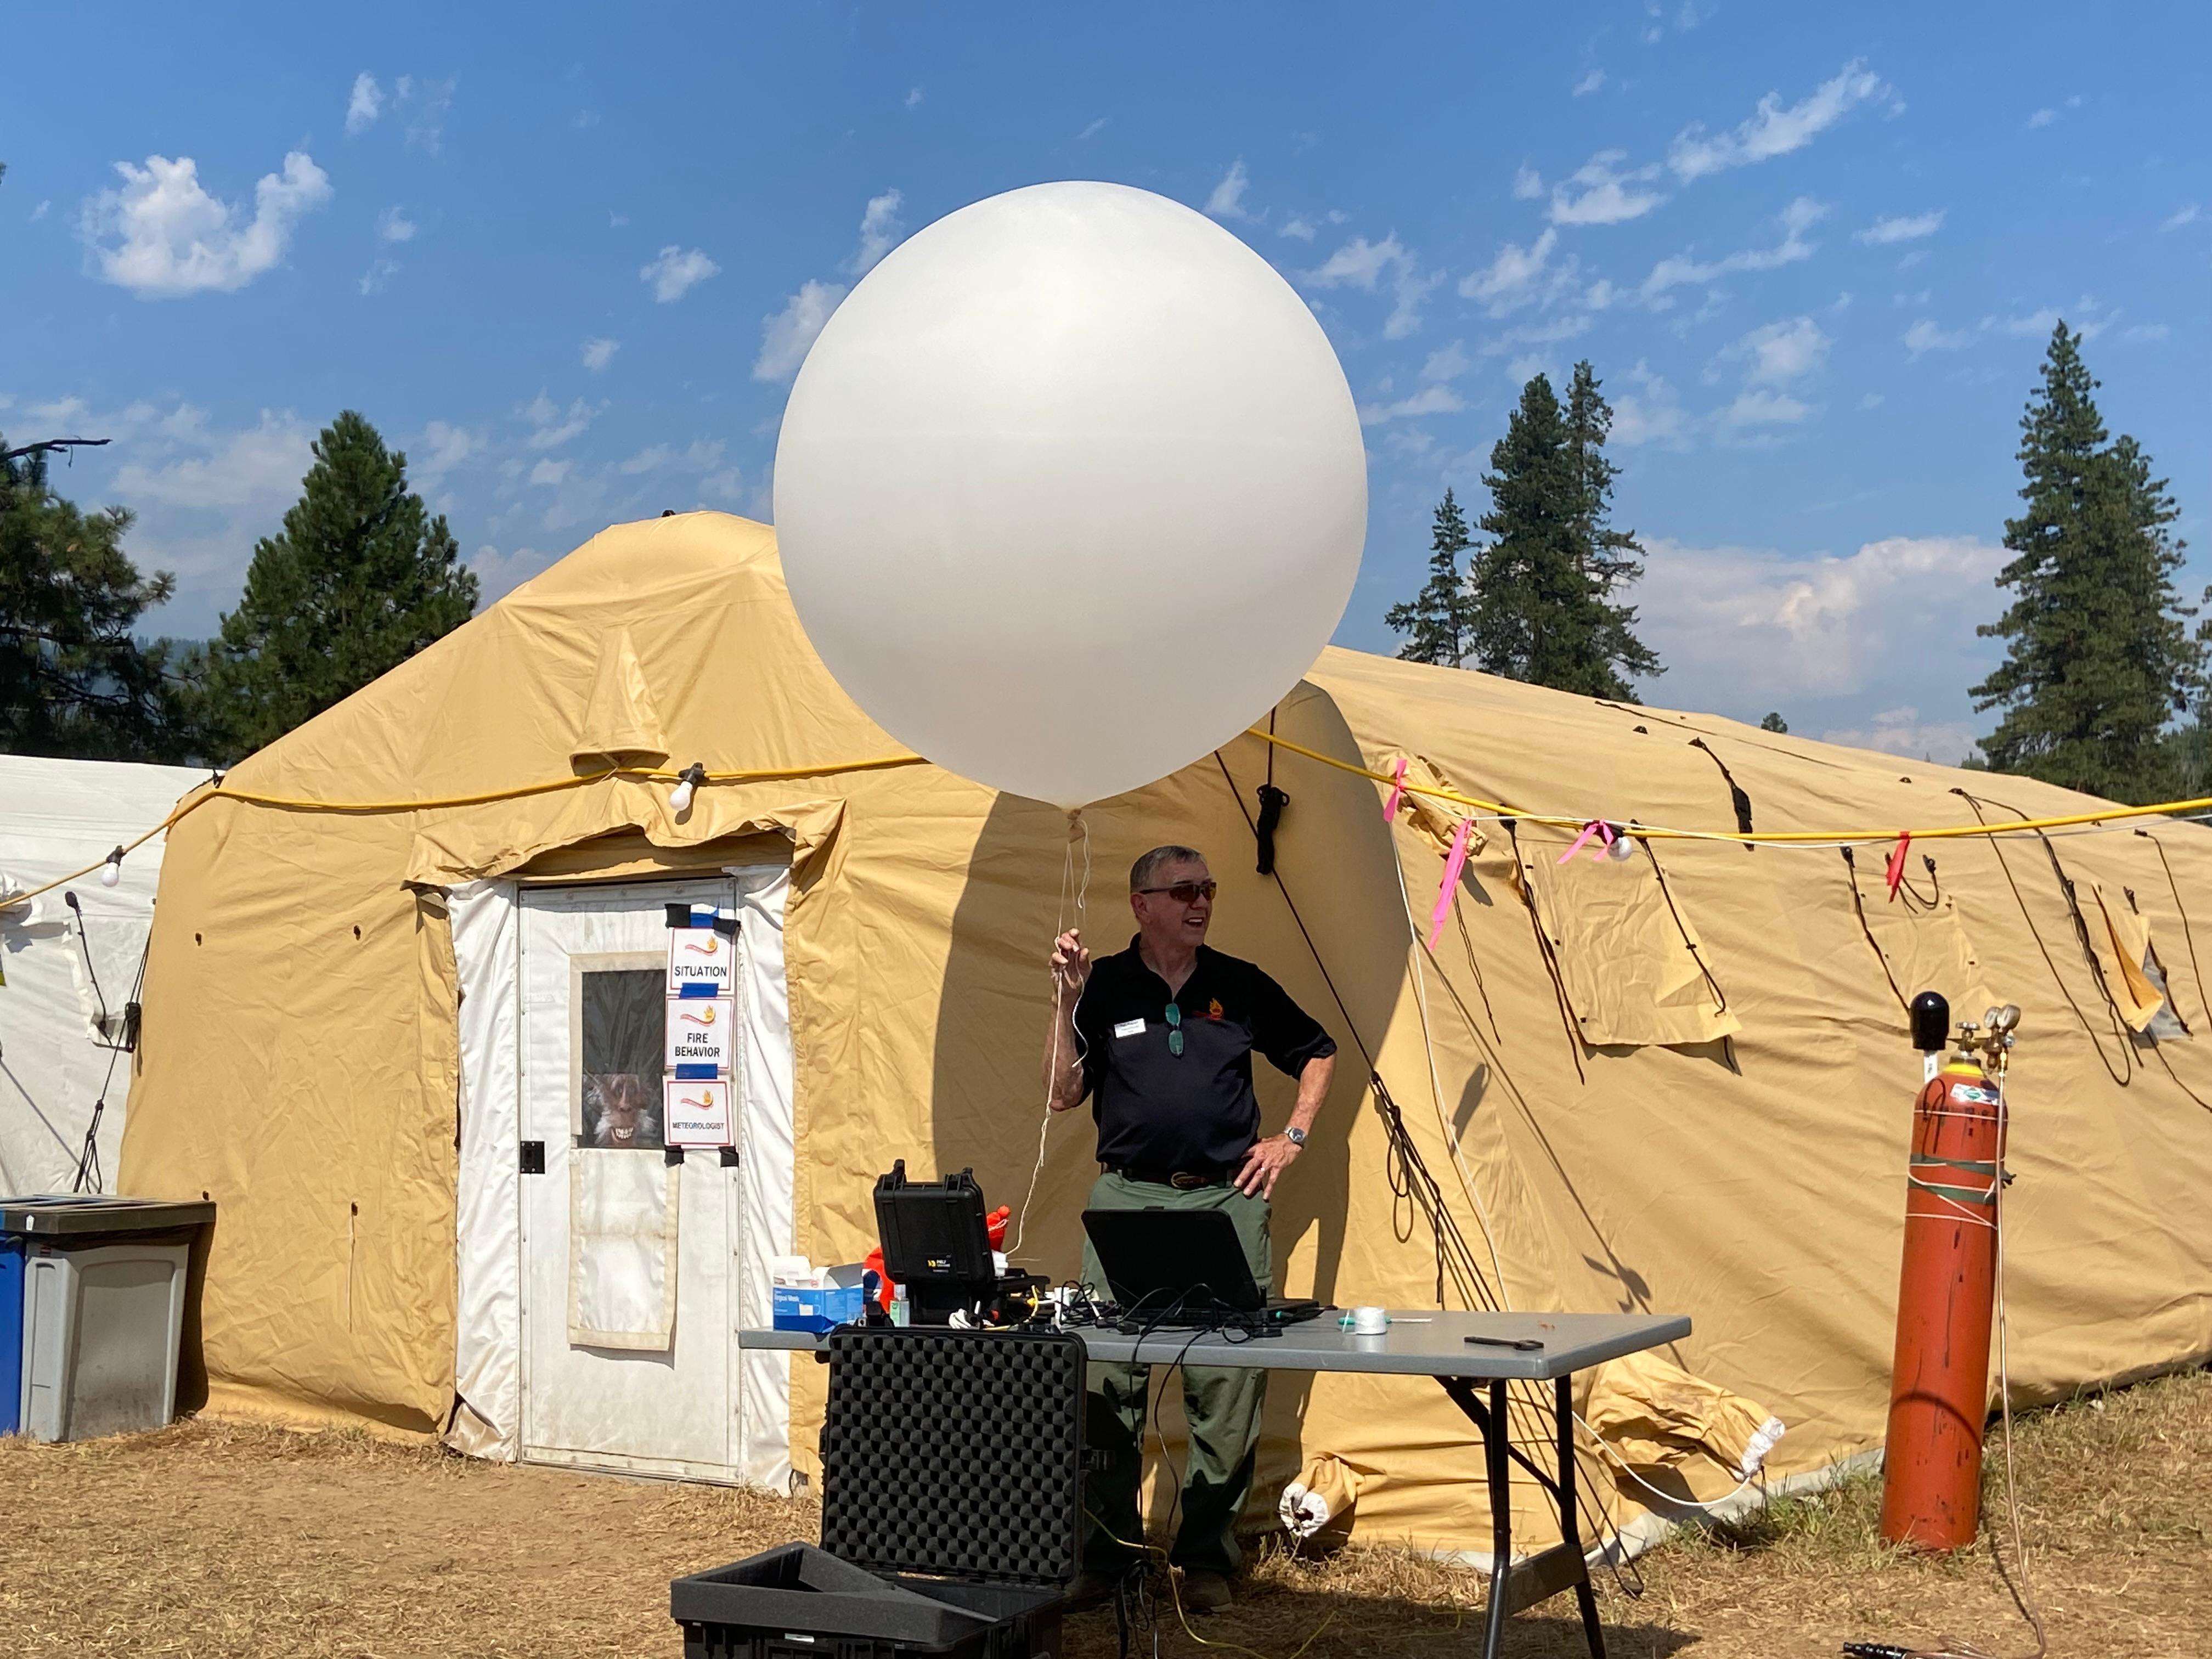 Launching a weather balloon from the White River Fire Camp.